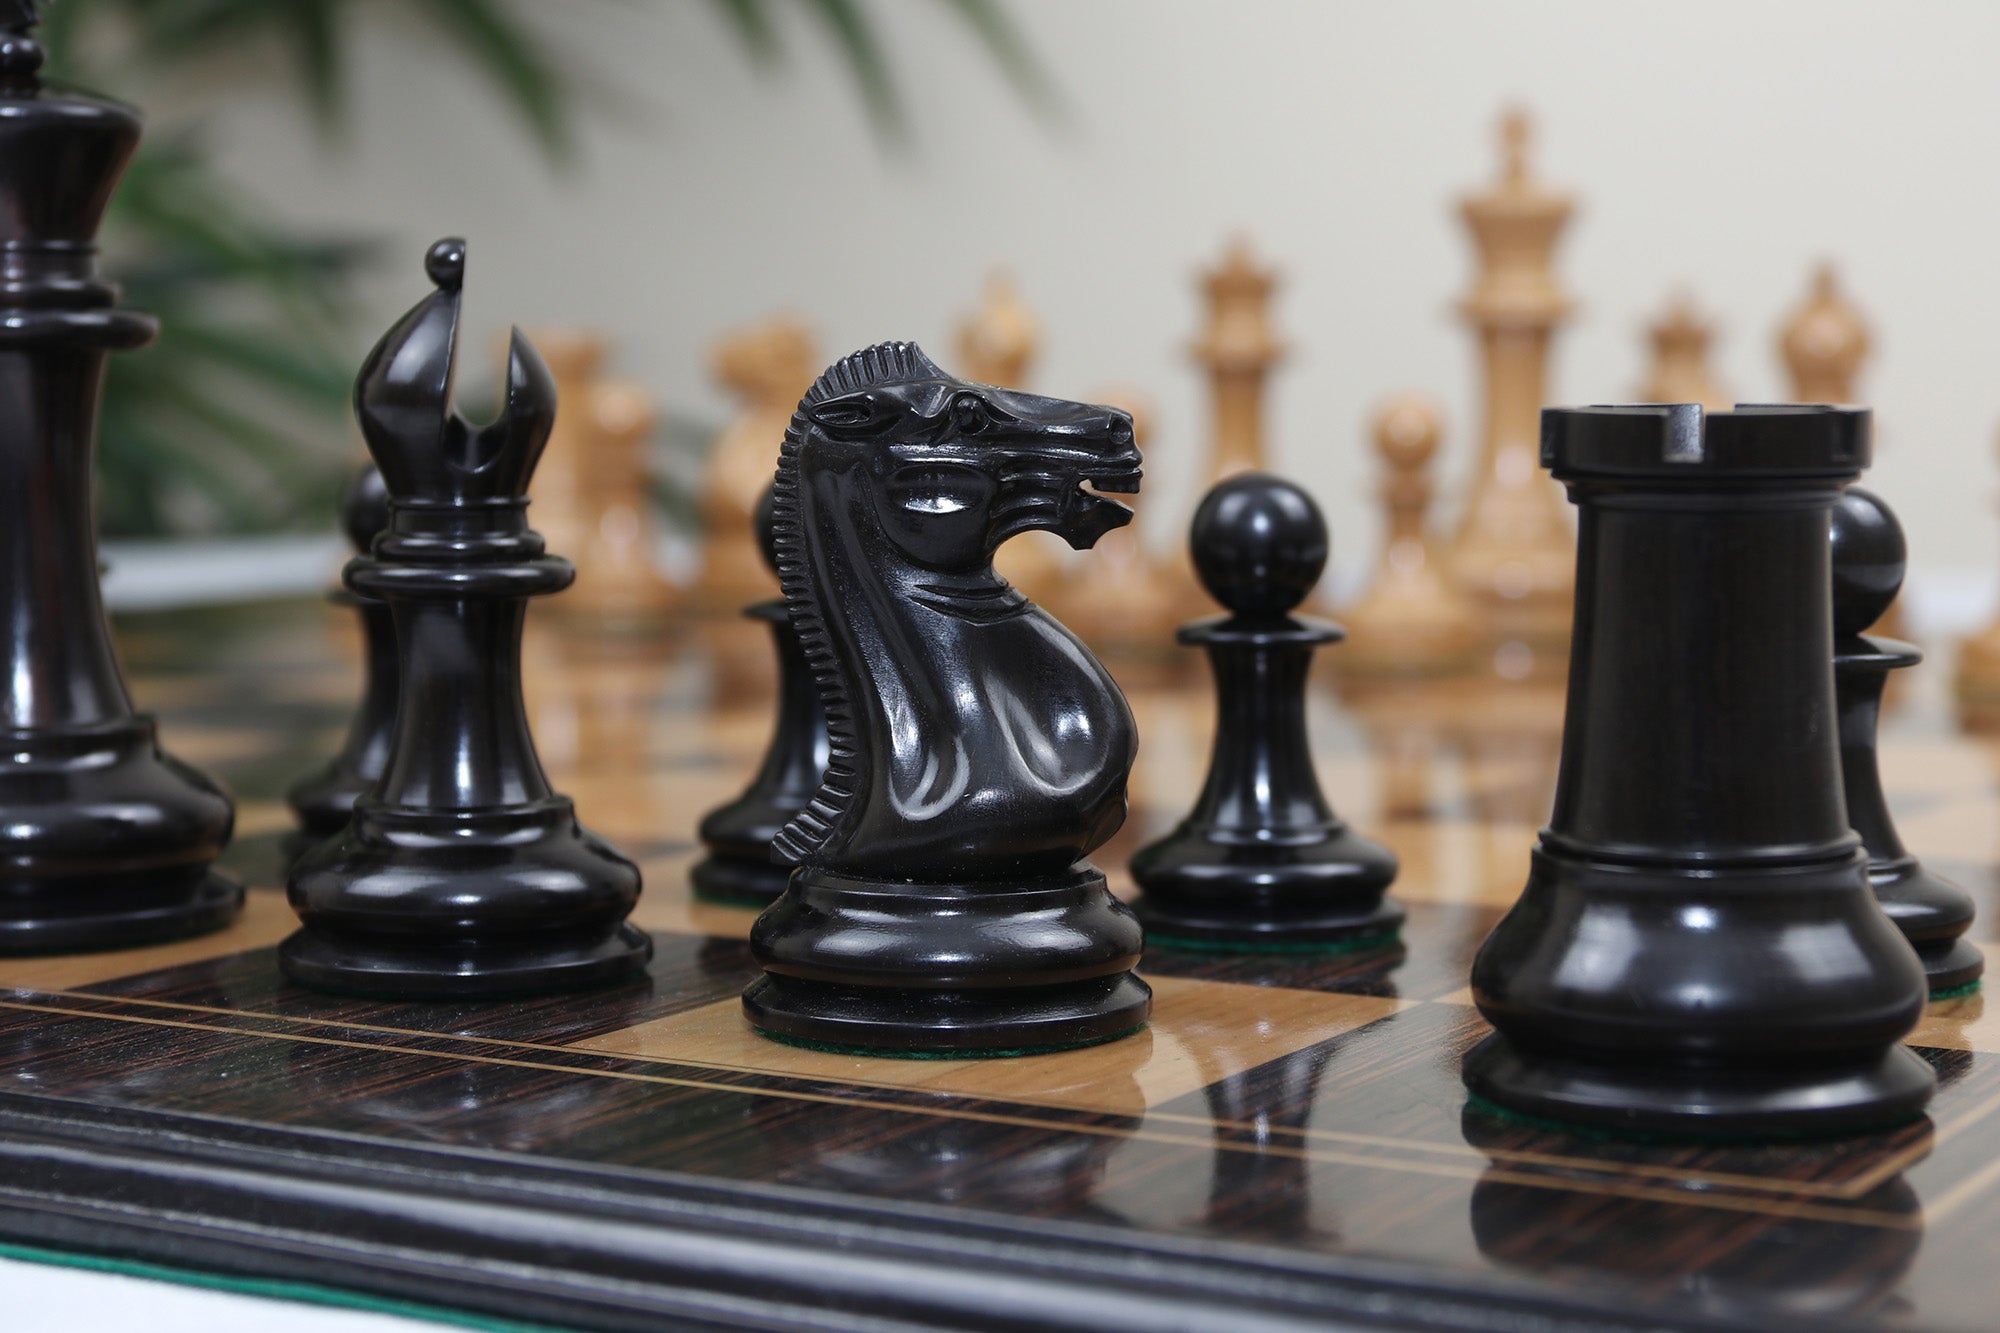 Original Reproduction Nathaniel 1849 Vintage 4.4" Chess Pieces in Antiqued Boxwood & Ebony